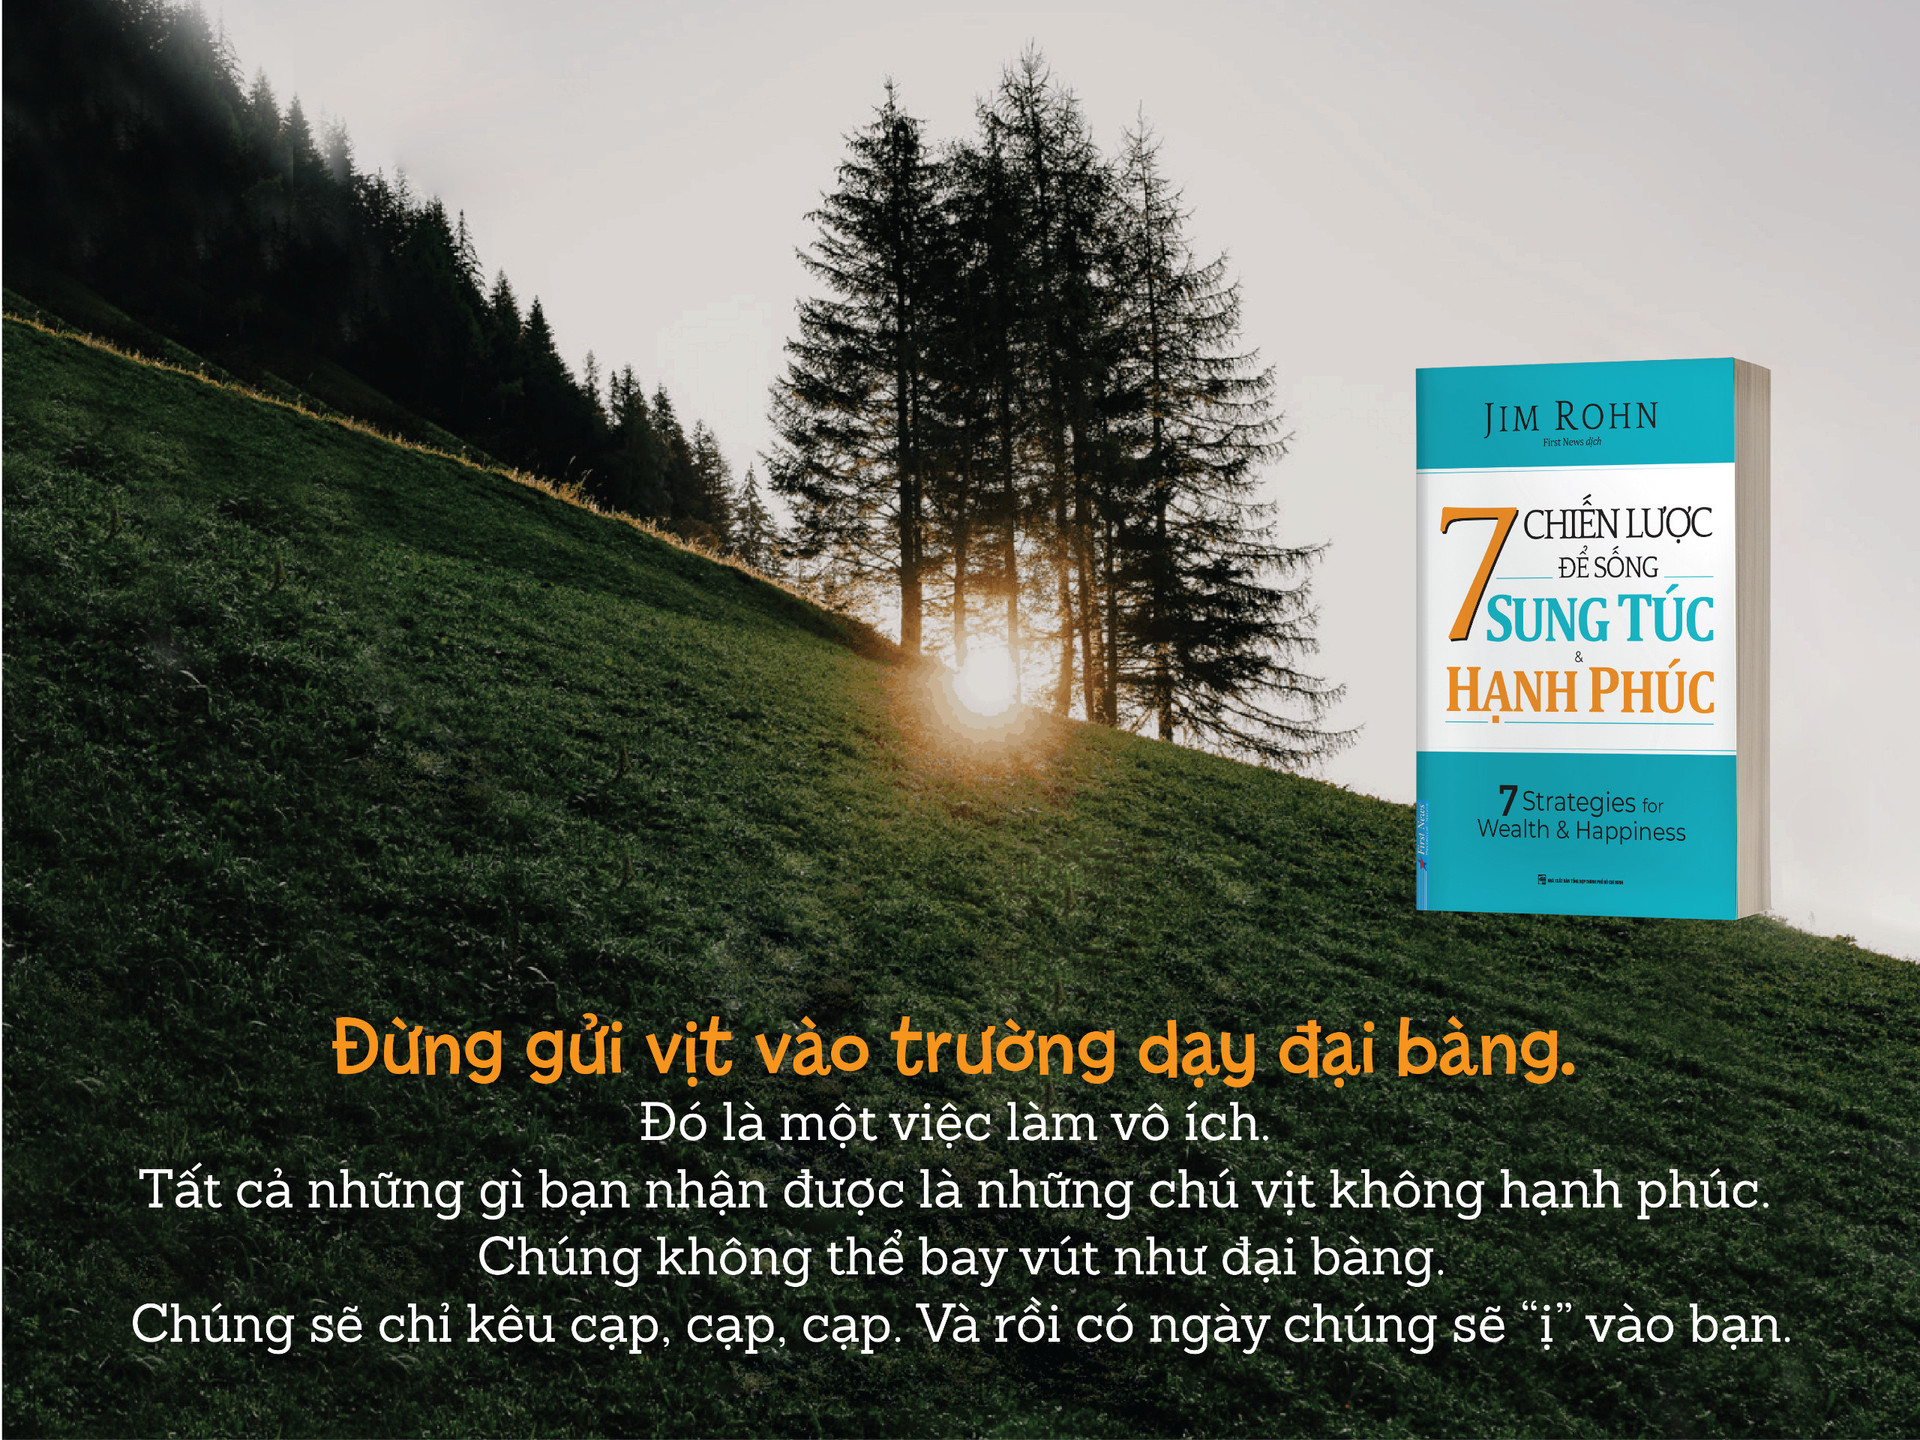 7chienluocdesongsungtuc-quote1a.jpg